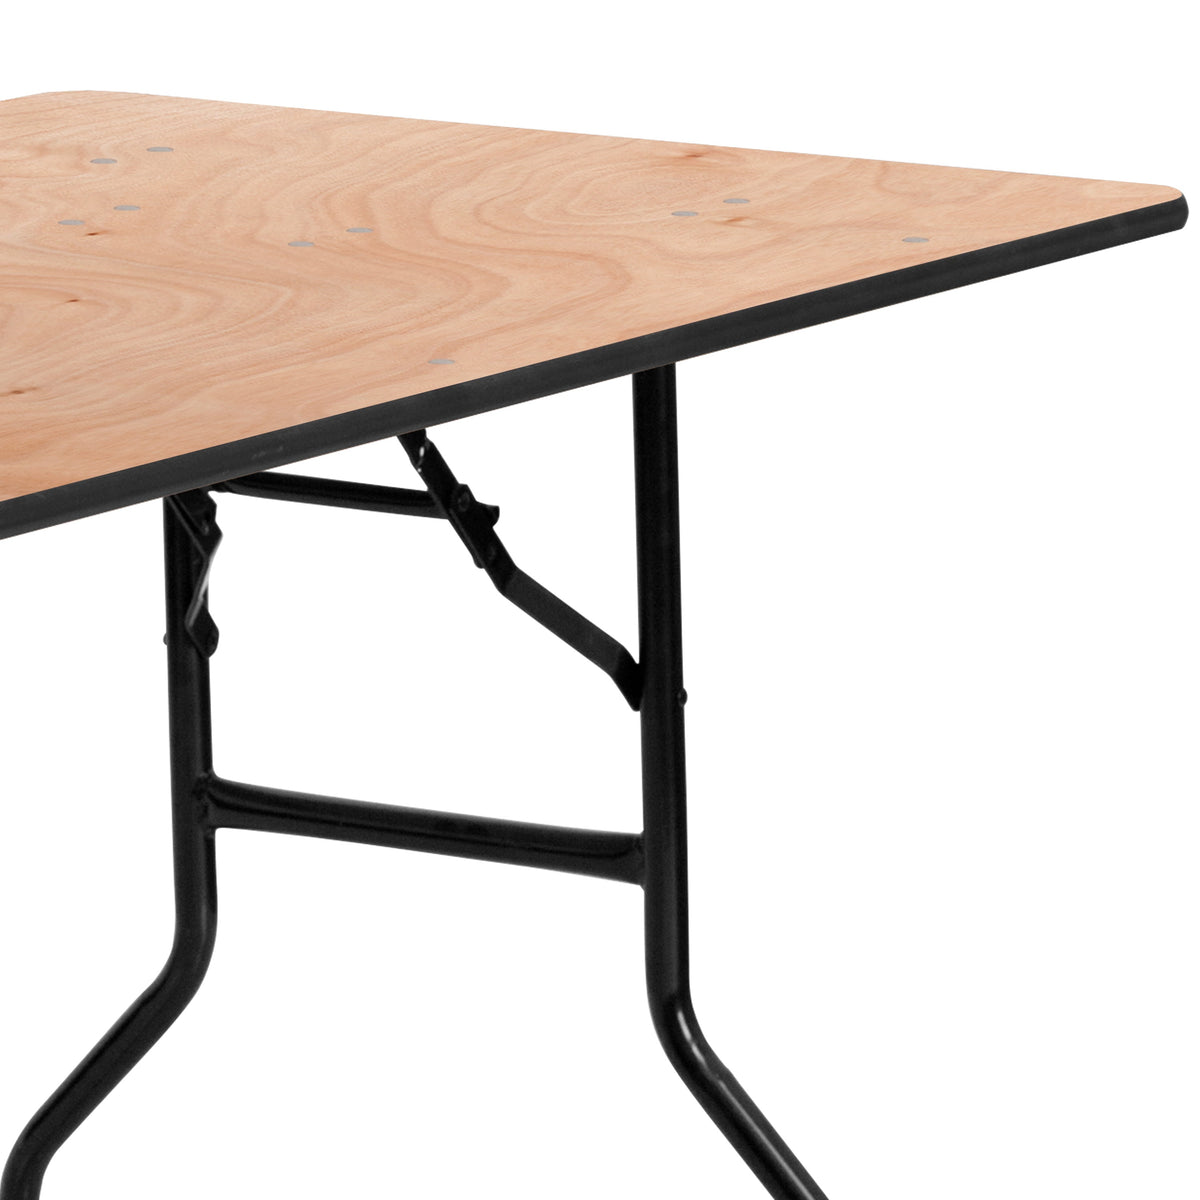 5-Foot Rectangular Wood Folding Banquet Table with Clear Coated Finished Top